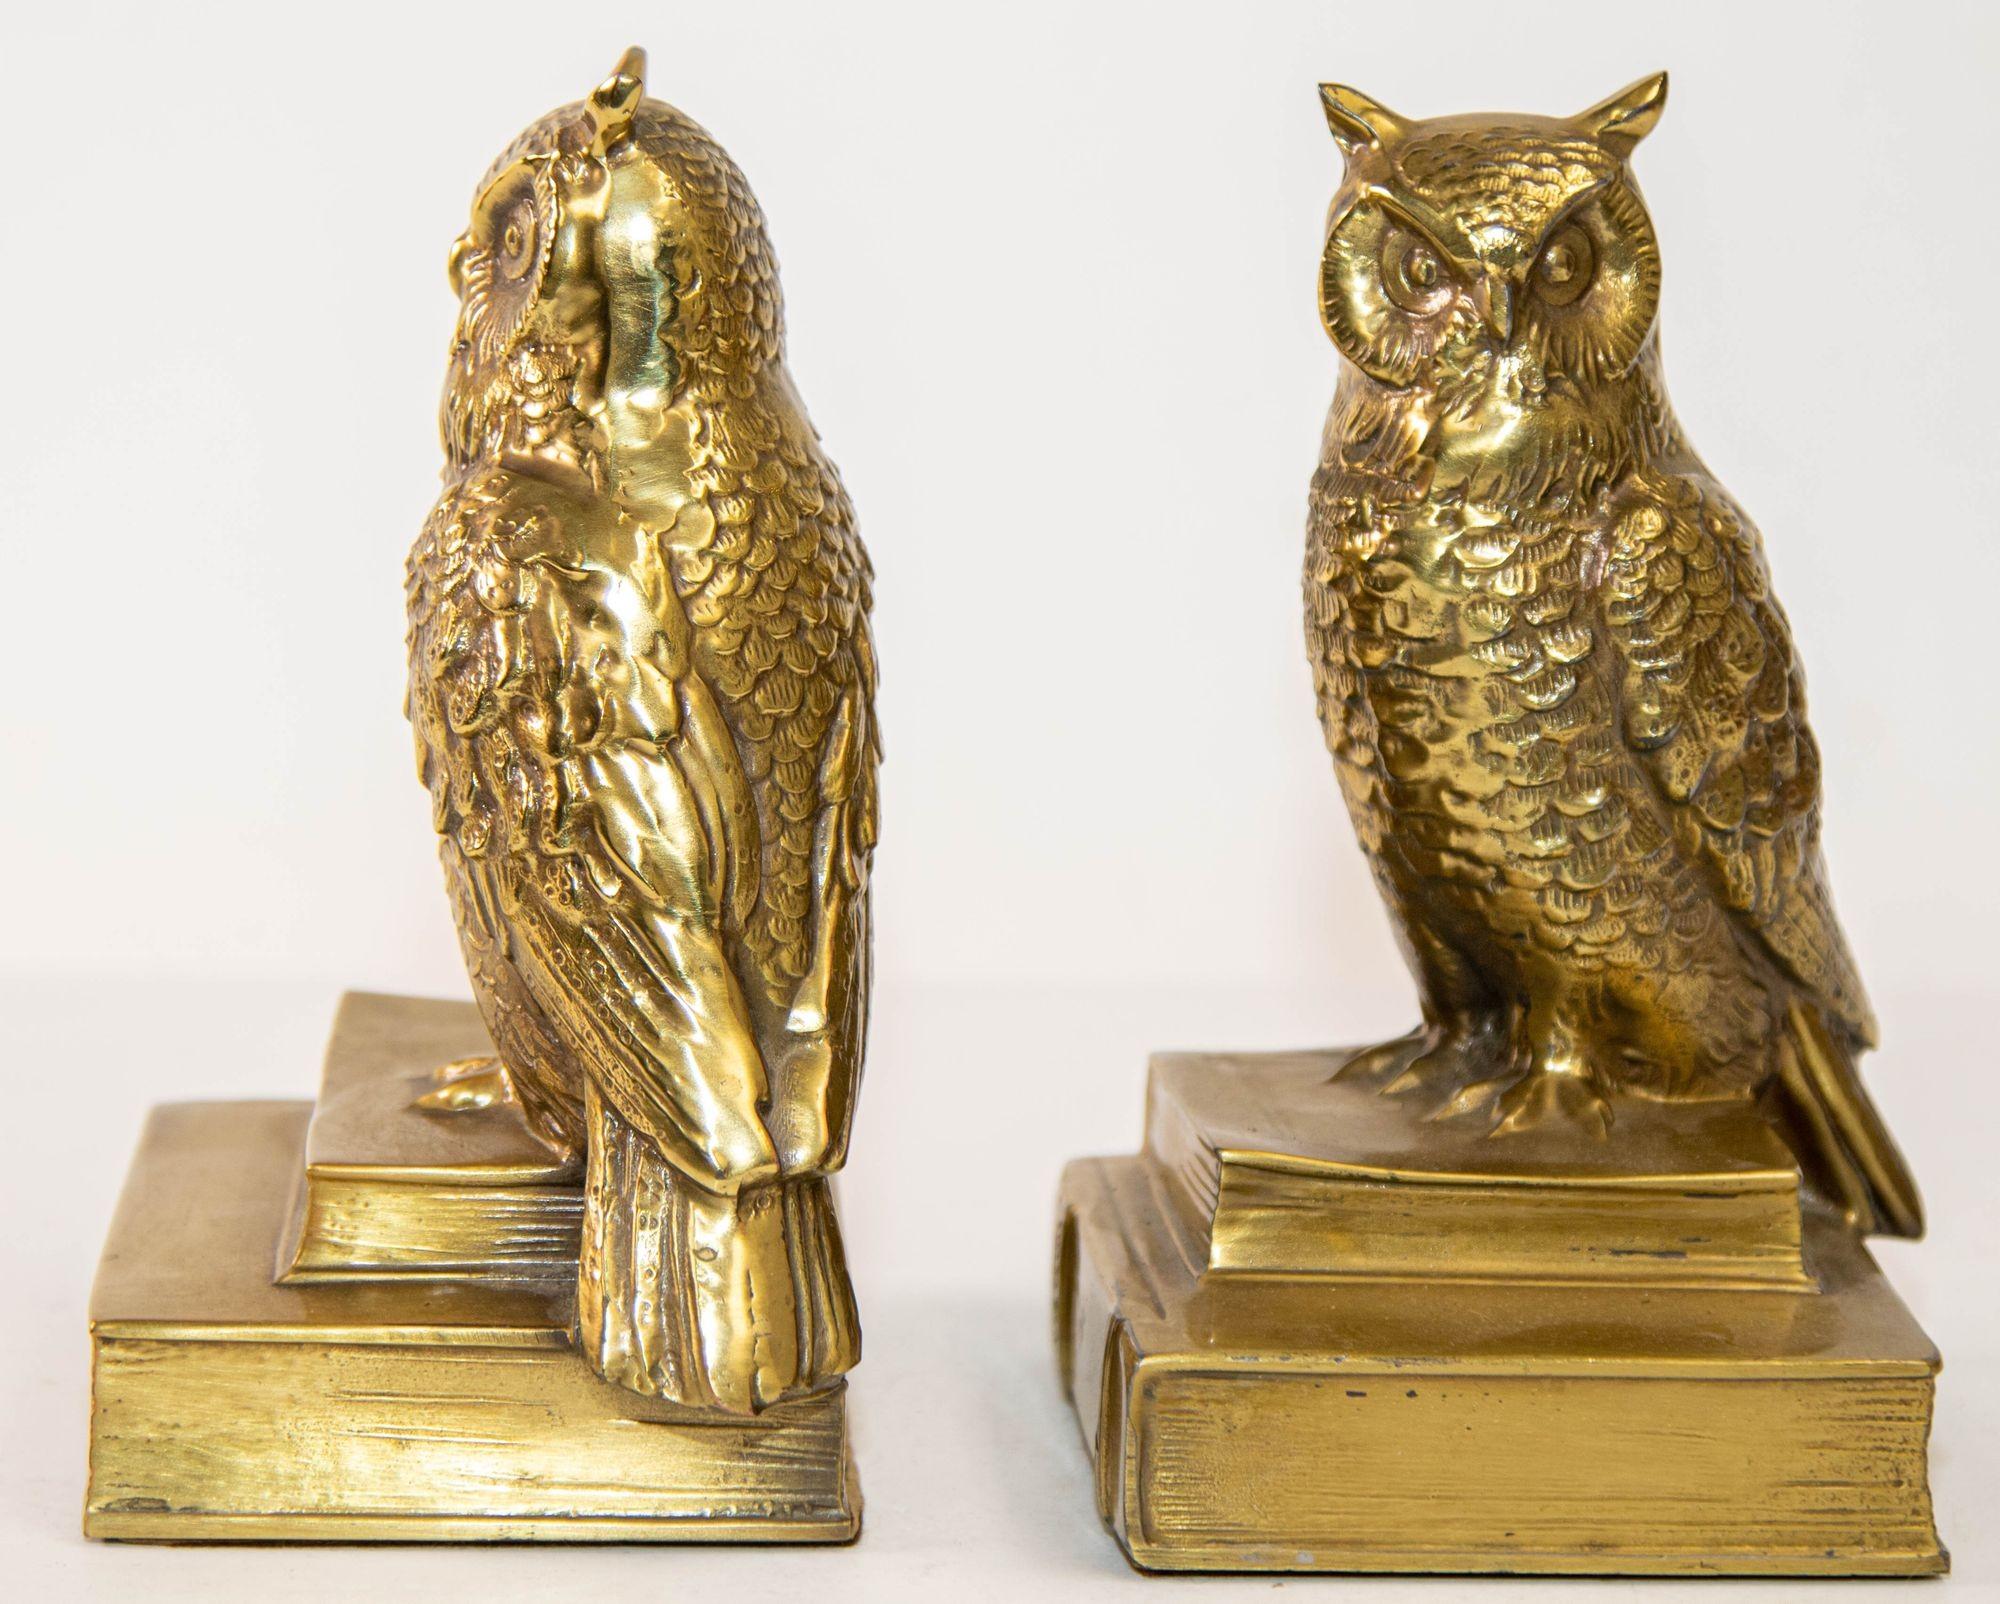 Vintage Cast Brass Owl Figurine Sculpture Bookends Mid-Century Modern a Pair.
Detailed Pair of solid brass book ends in the shape of owl sculptures.
Pair of owl bookends in cast bronze sitting on two history books. 
Vintage Mid-Century Modern